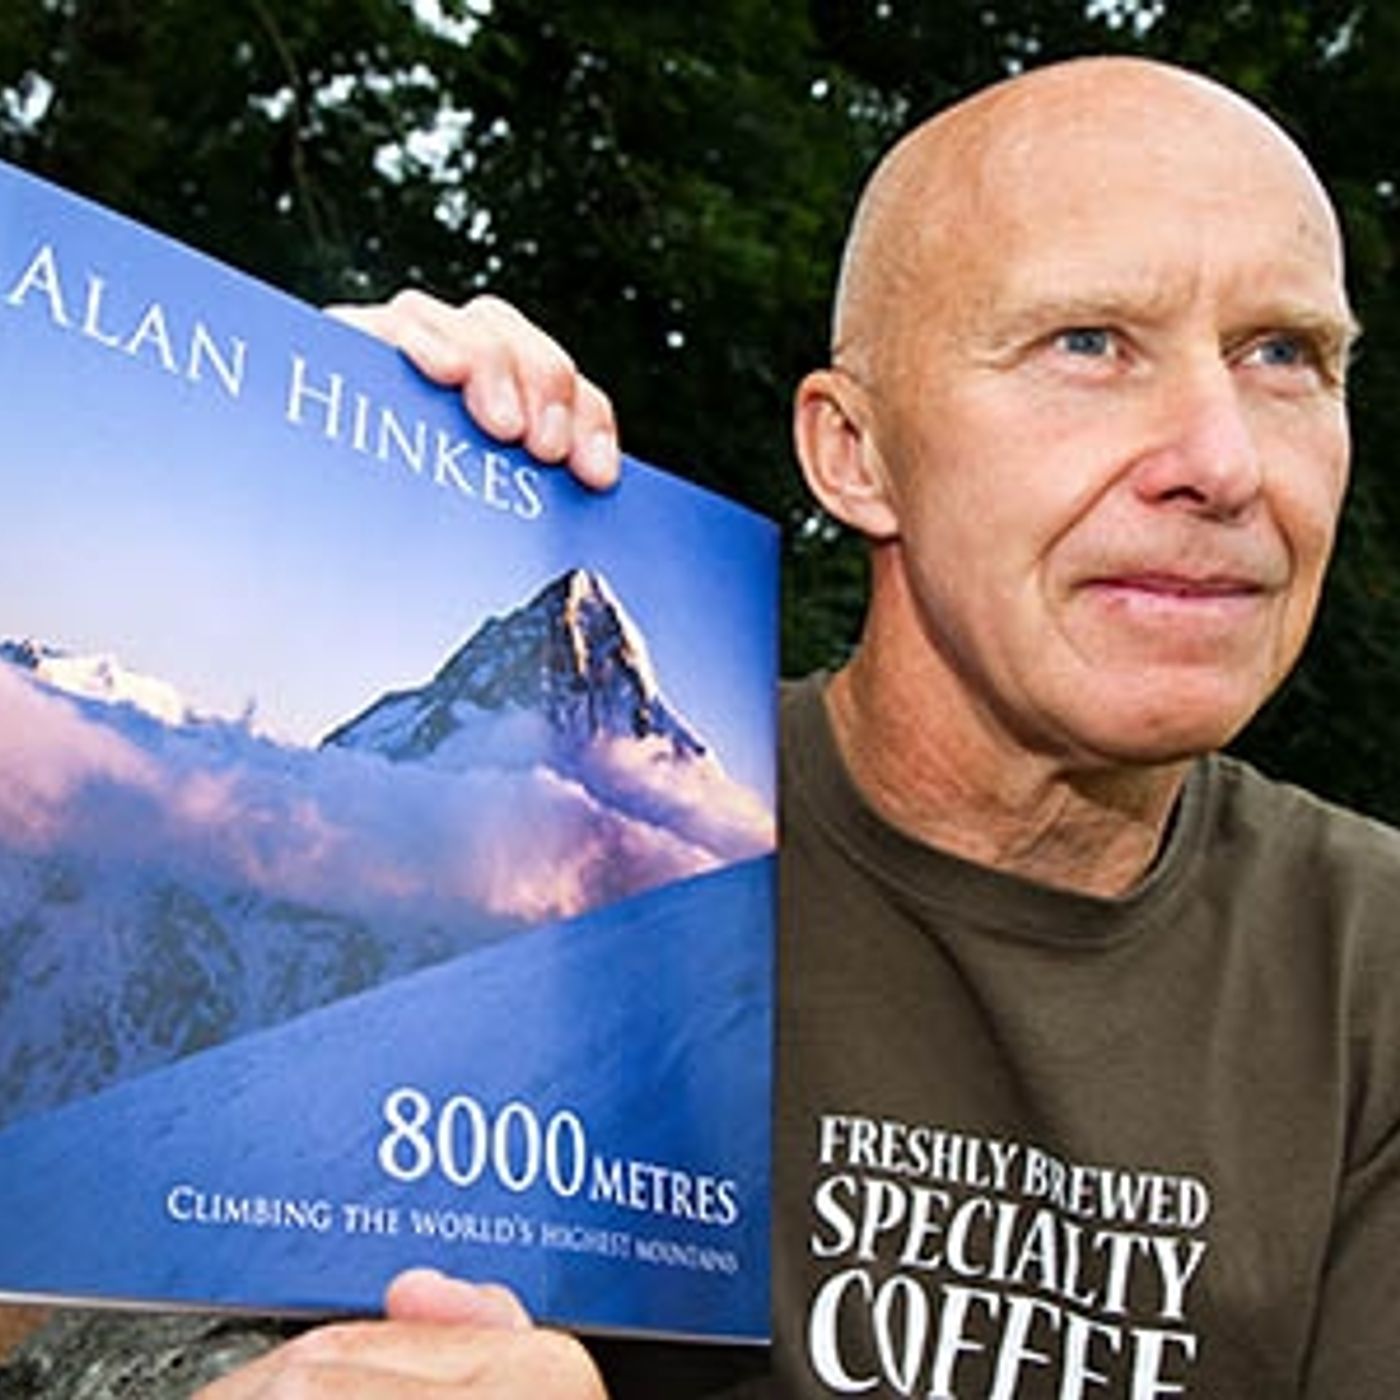 S1 Ep19: Isle of Man Walking Festival, The Ladybird Guide to GPS and Alan Hinkes on his new book